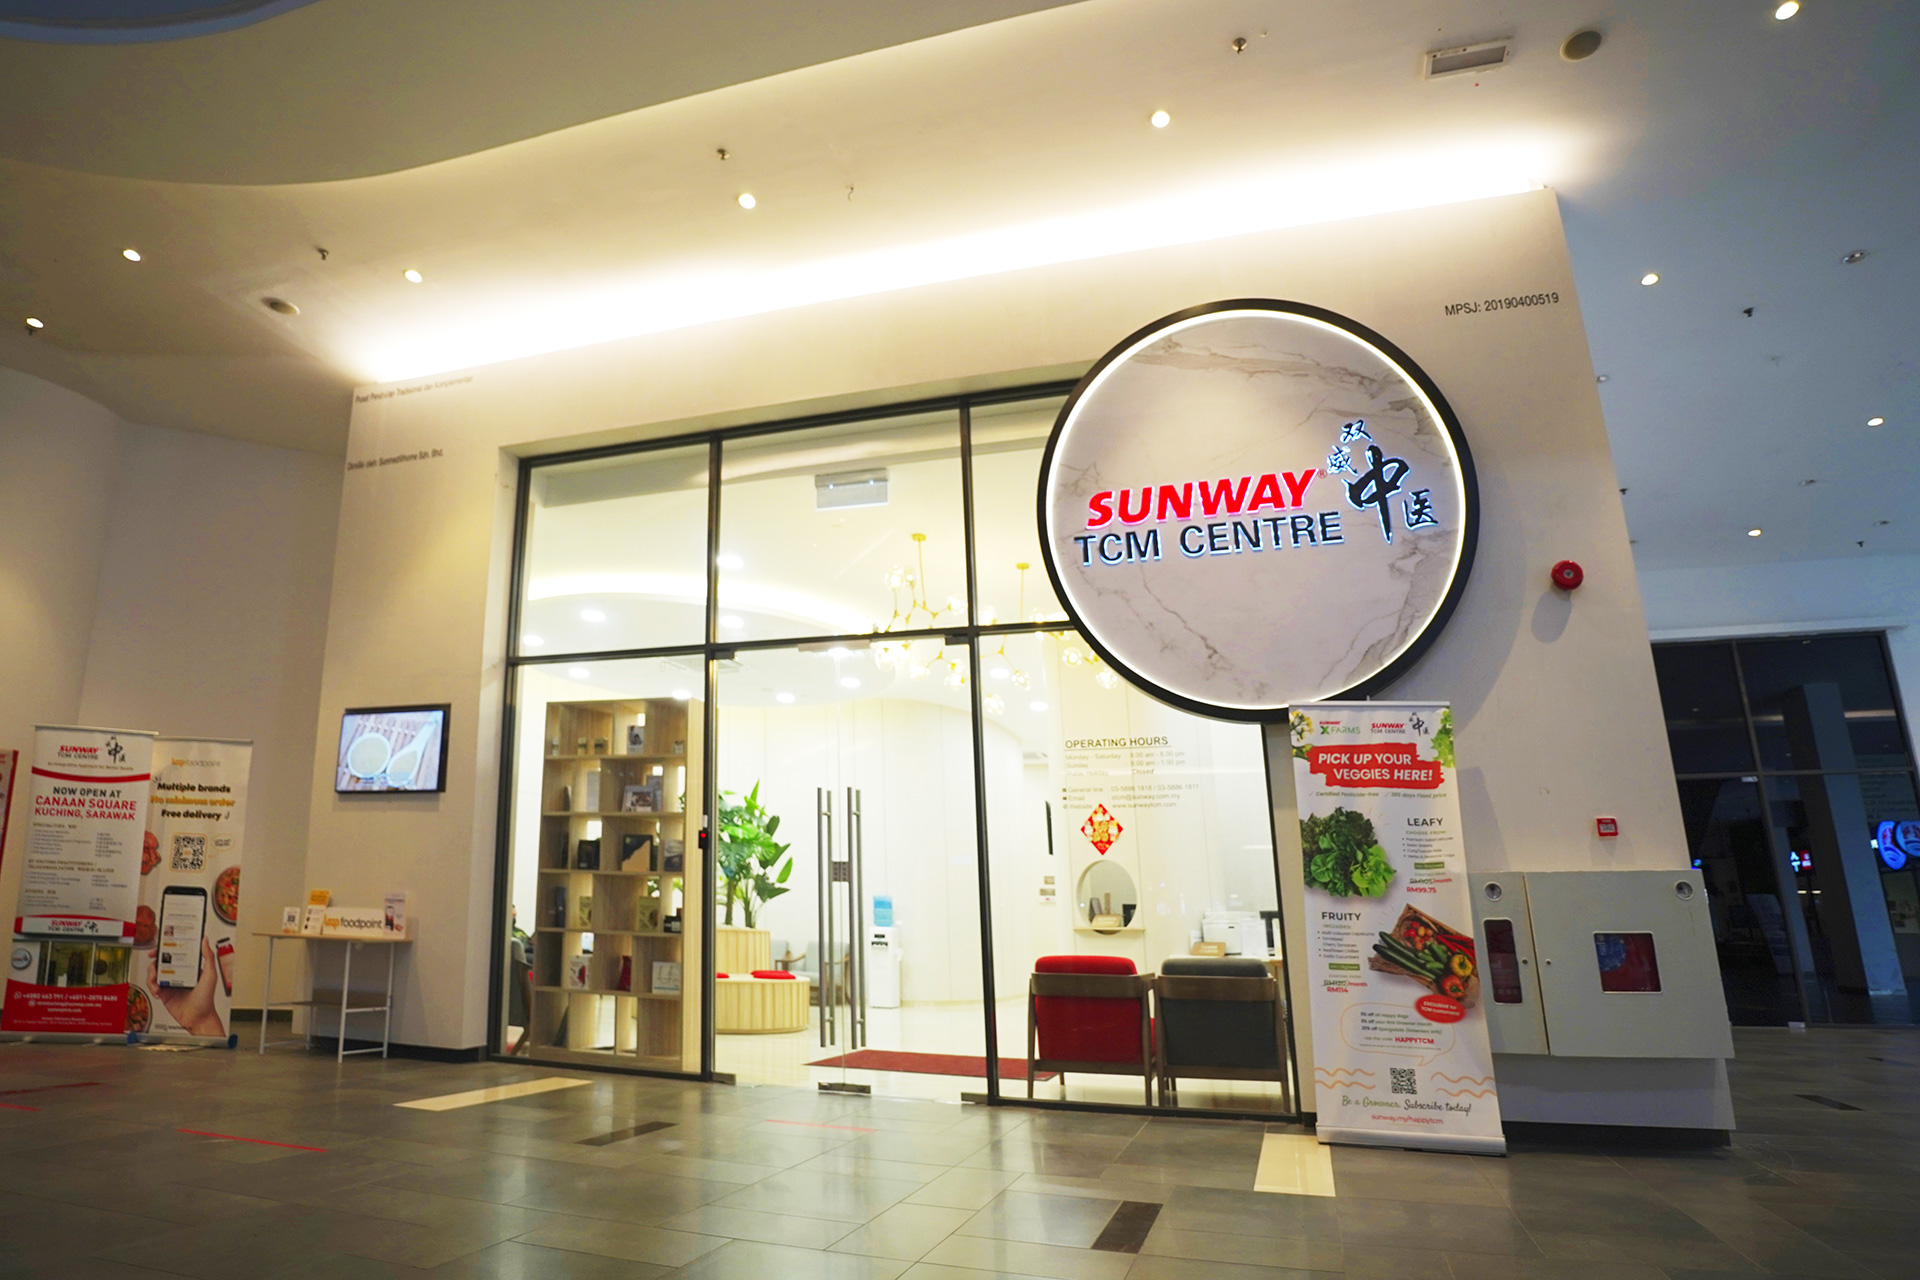 Book a consultation with our TCM experts to improve your overall wellbeing holistically! Sunway TCM Centre